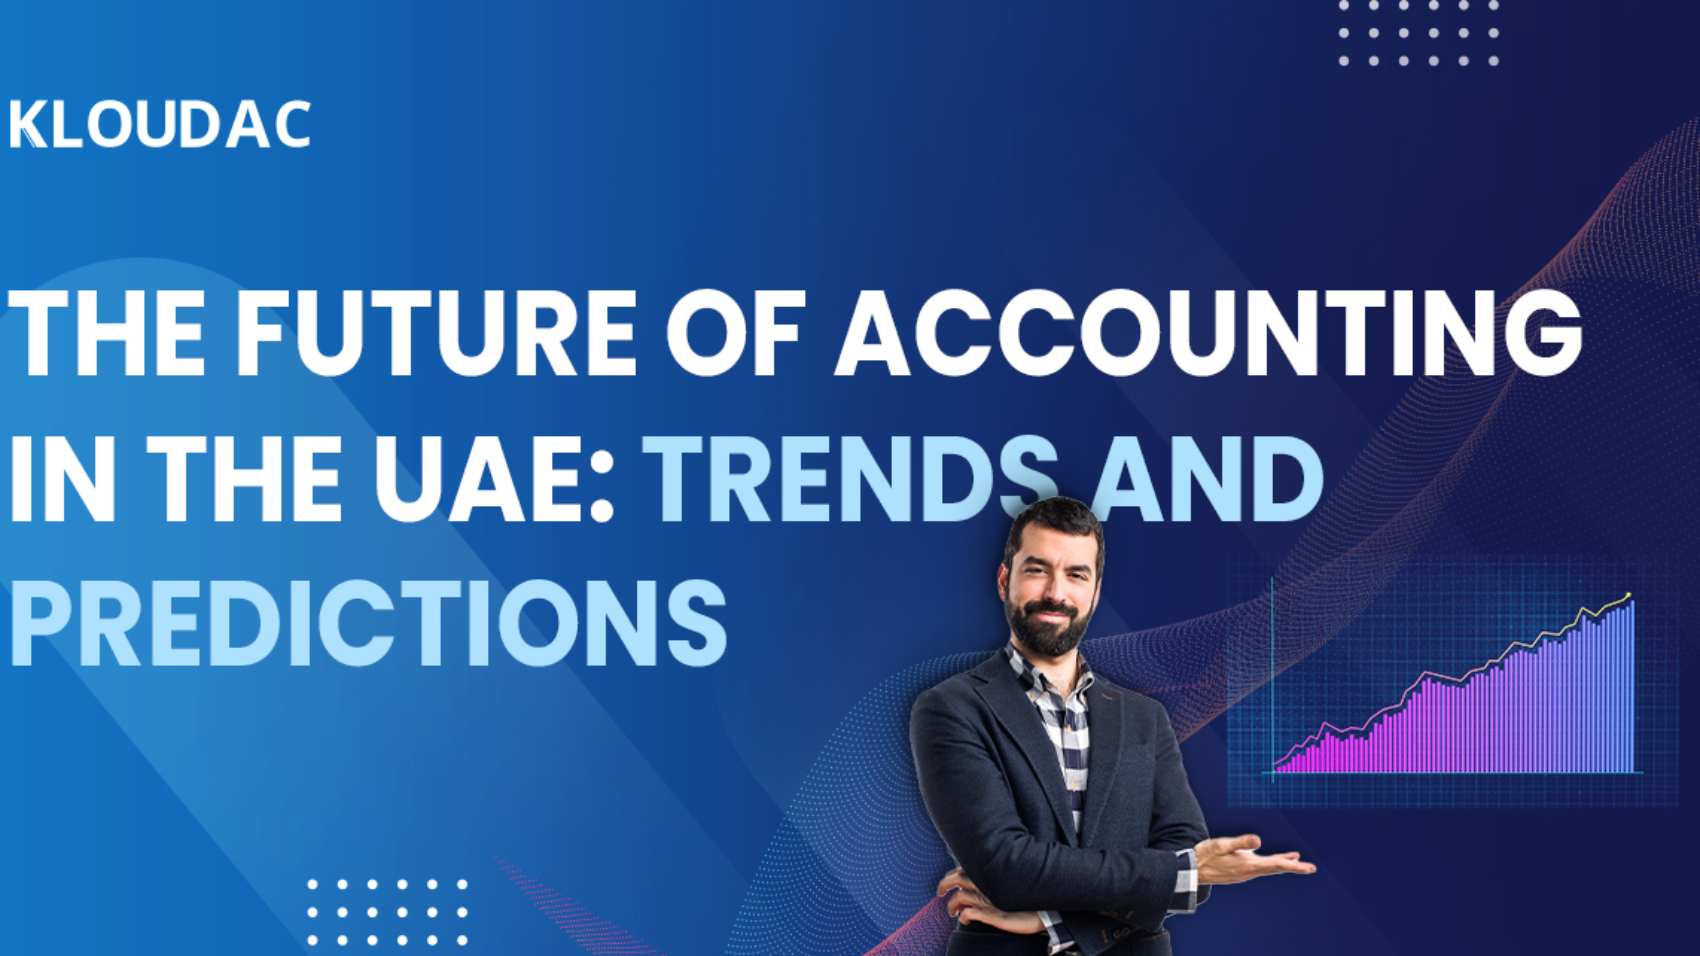 The Future of Accounting in the UAE: Trends and Predictions